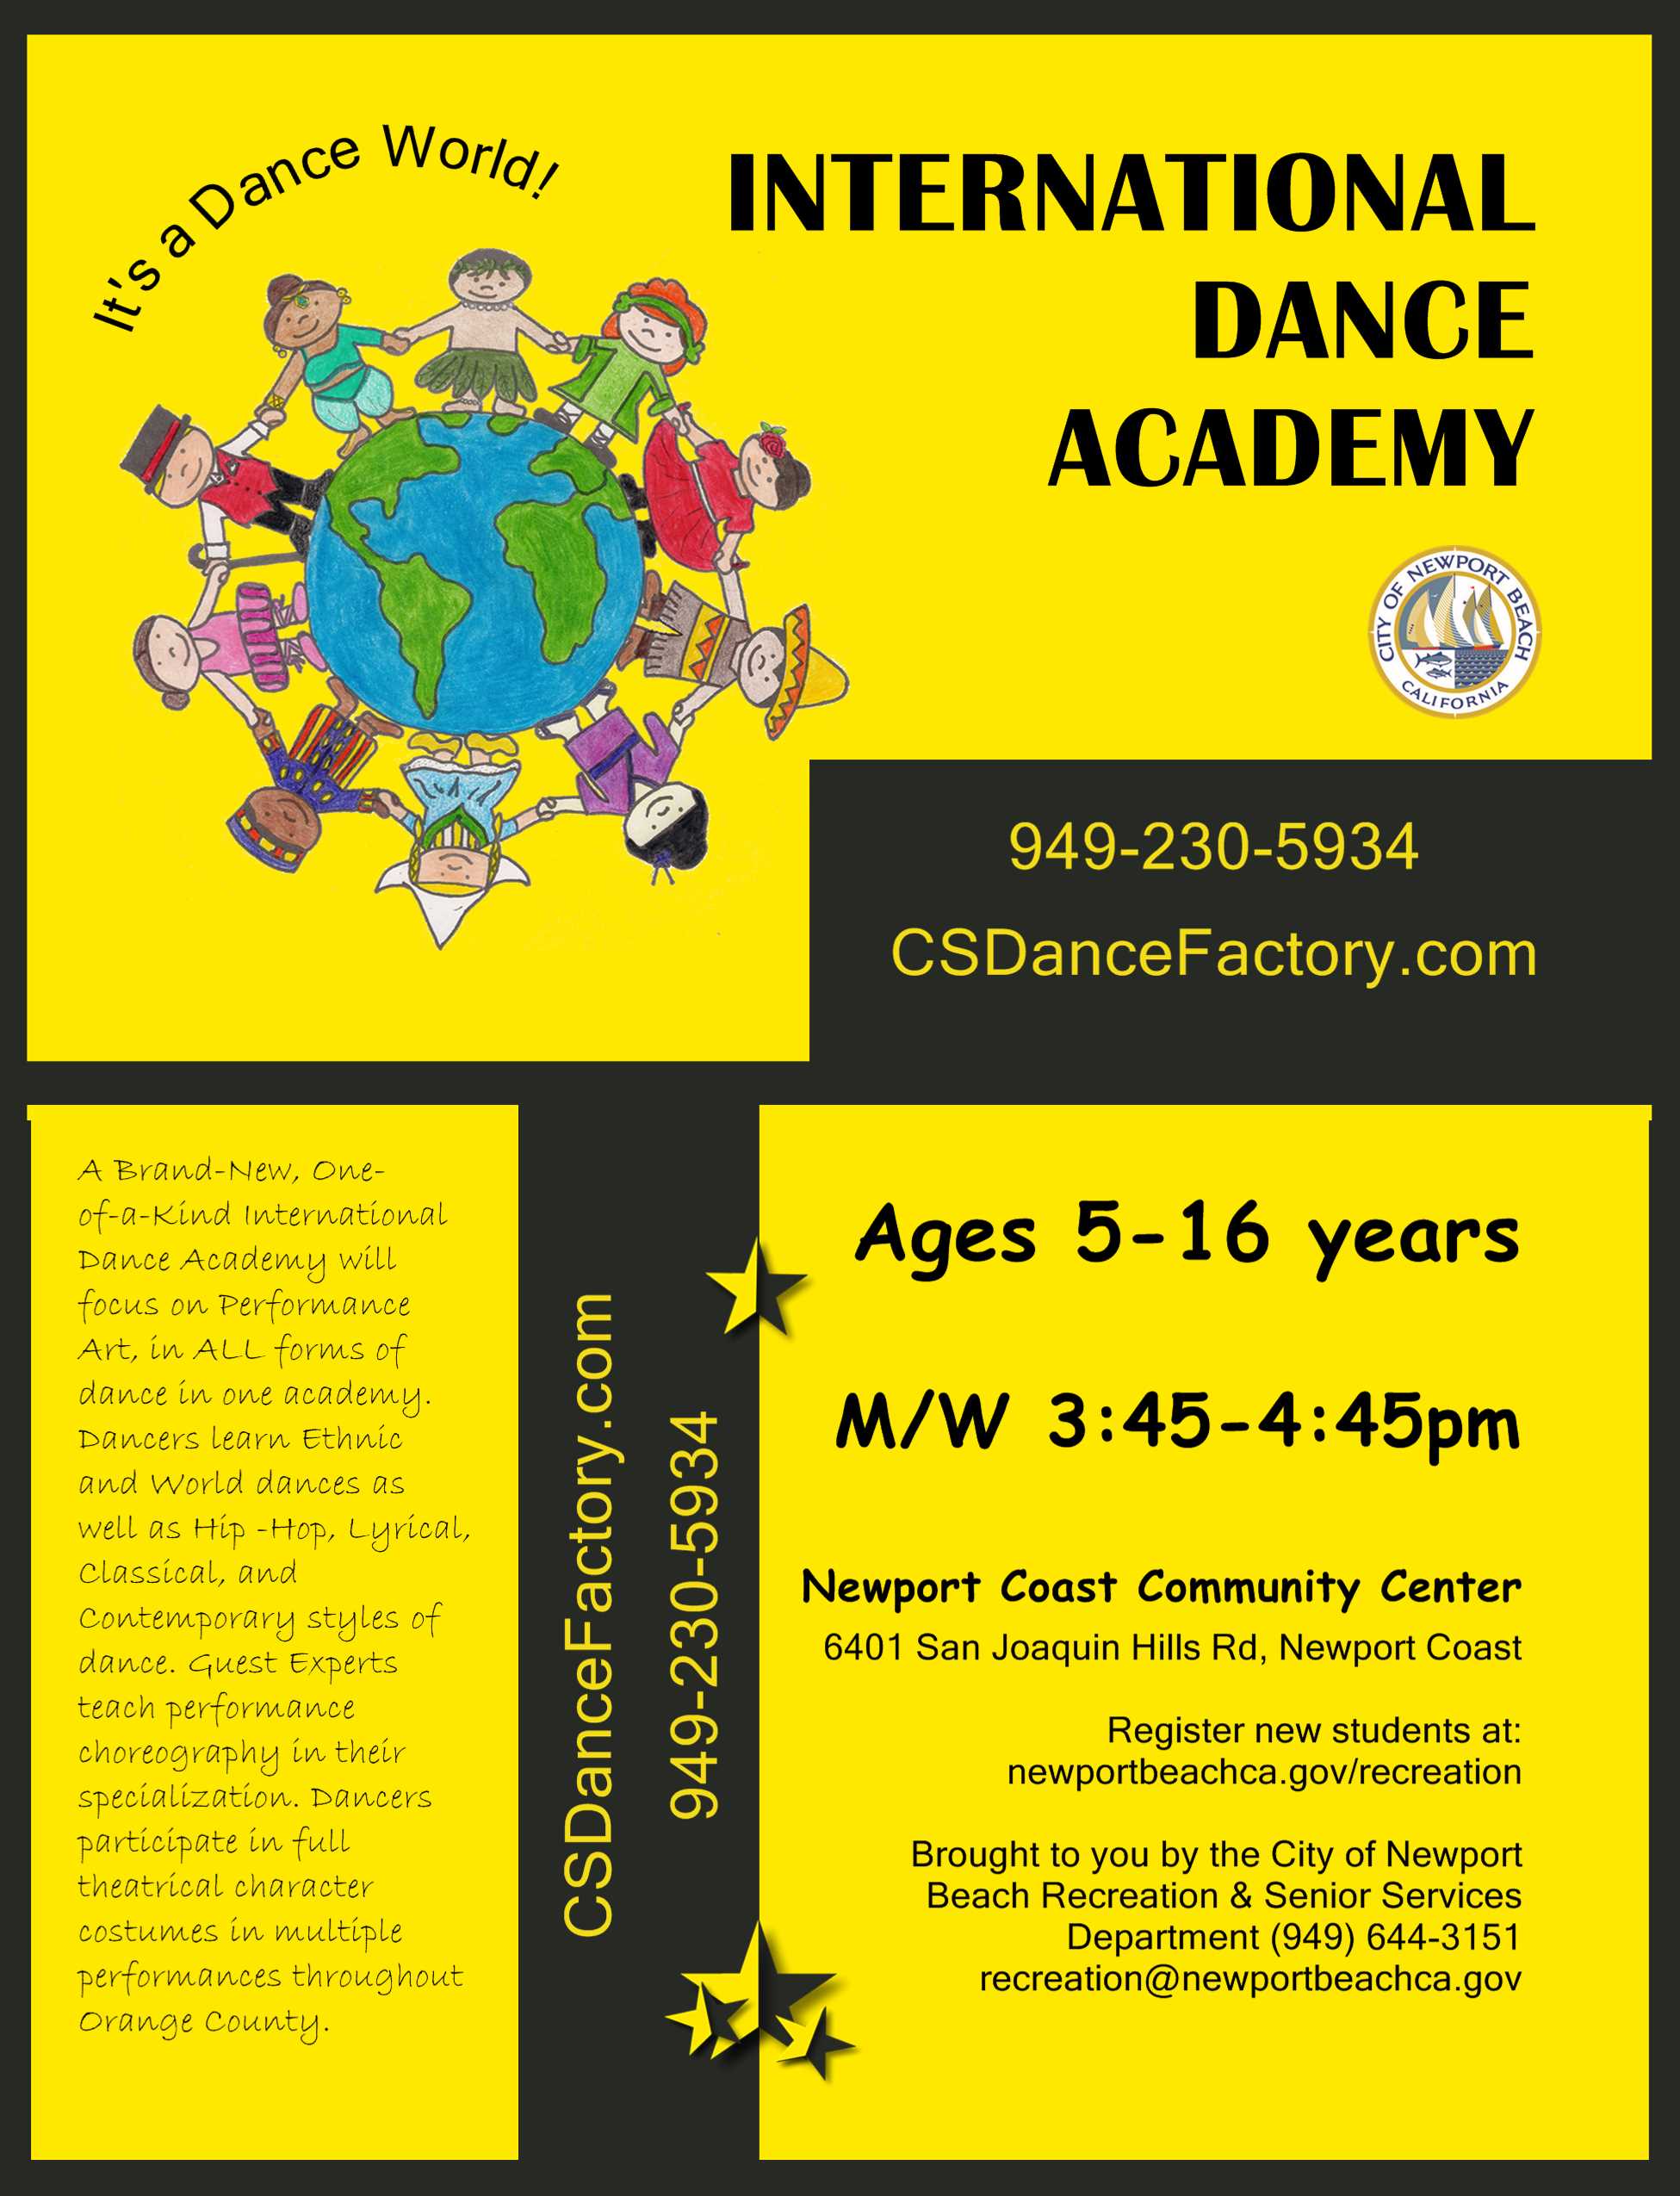 Brand NEW Cultural Dance Performance Group! Parent Info Session 4/15 5pm. International Dance Academy, M/W 3:45-4:45, Ages 5-16 yrs. Newport Coast Community Center 6401 San Joaquin Hills Rd, Newport Coast, Register new students at: newportbeachca.gov/recreation . Brought to you by CSDanceFactory.com, 949-375-2277. Offered at the City of Newport Beach Recreation & Senior Services Department (949) 644-3151, recreation@newportbeachca.gov . A Brand-New, One-of-a-Kind International Dance Academy will focus on Performance Art, in ALL forms of dance in one academy. Dancers learn Ethnic and World dances as well as Hip -Hop, Lyrical, Classical, and Contemporary styles of dance. Guest Experts teach performance choreography in their specialization. Dancers participate in full theatrical character costumes in multiple performances throughout Orange County